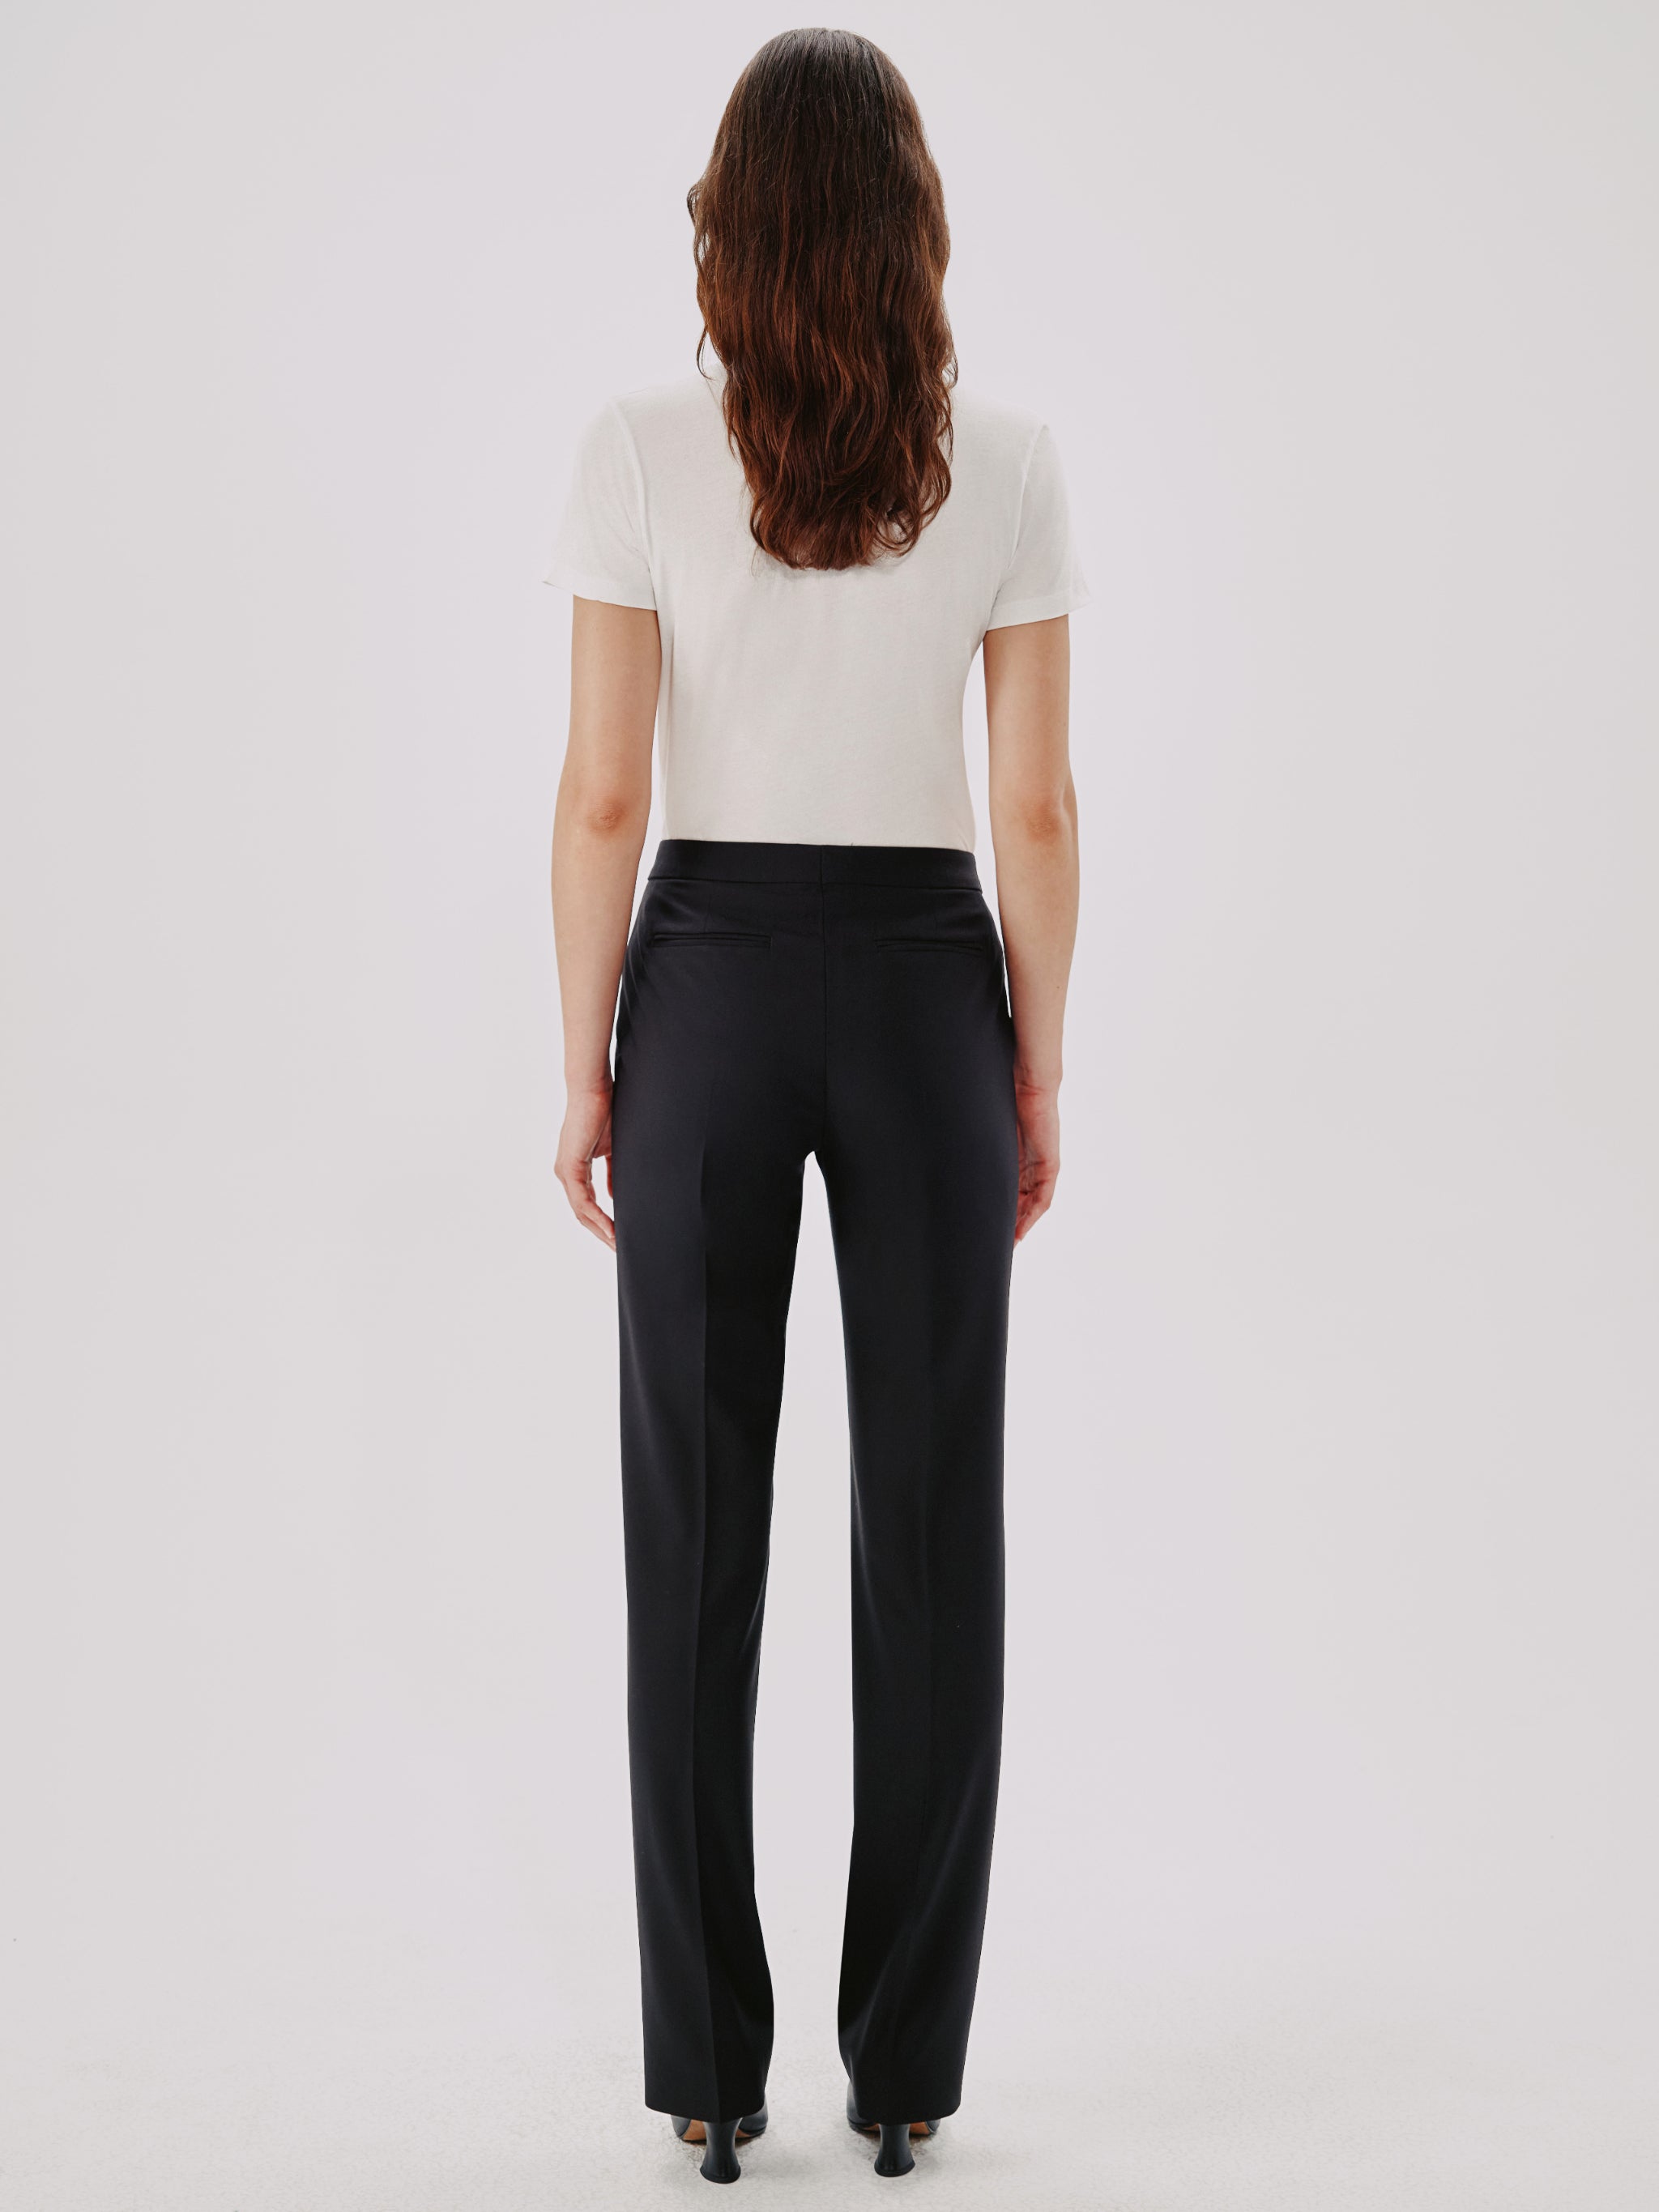 STYLERAGS Relaxed Women Black Trousers - Buy STYLERAGS Relaxed Women Black  Trousers Online at Best Prices in India | Flipkart.com